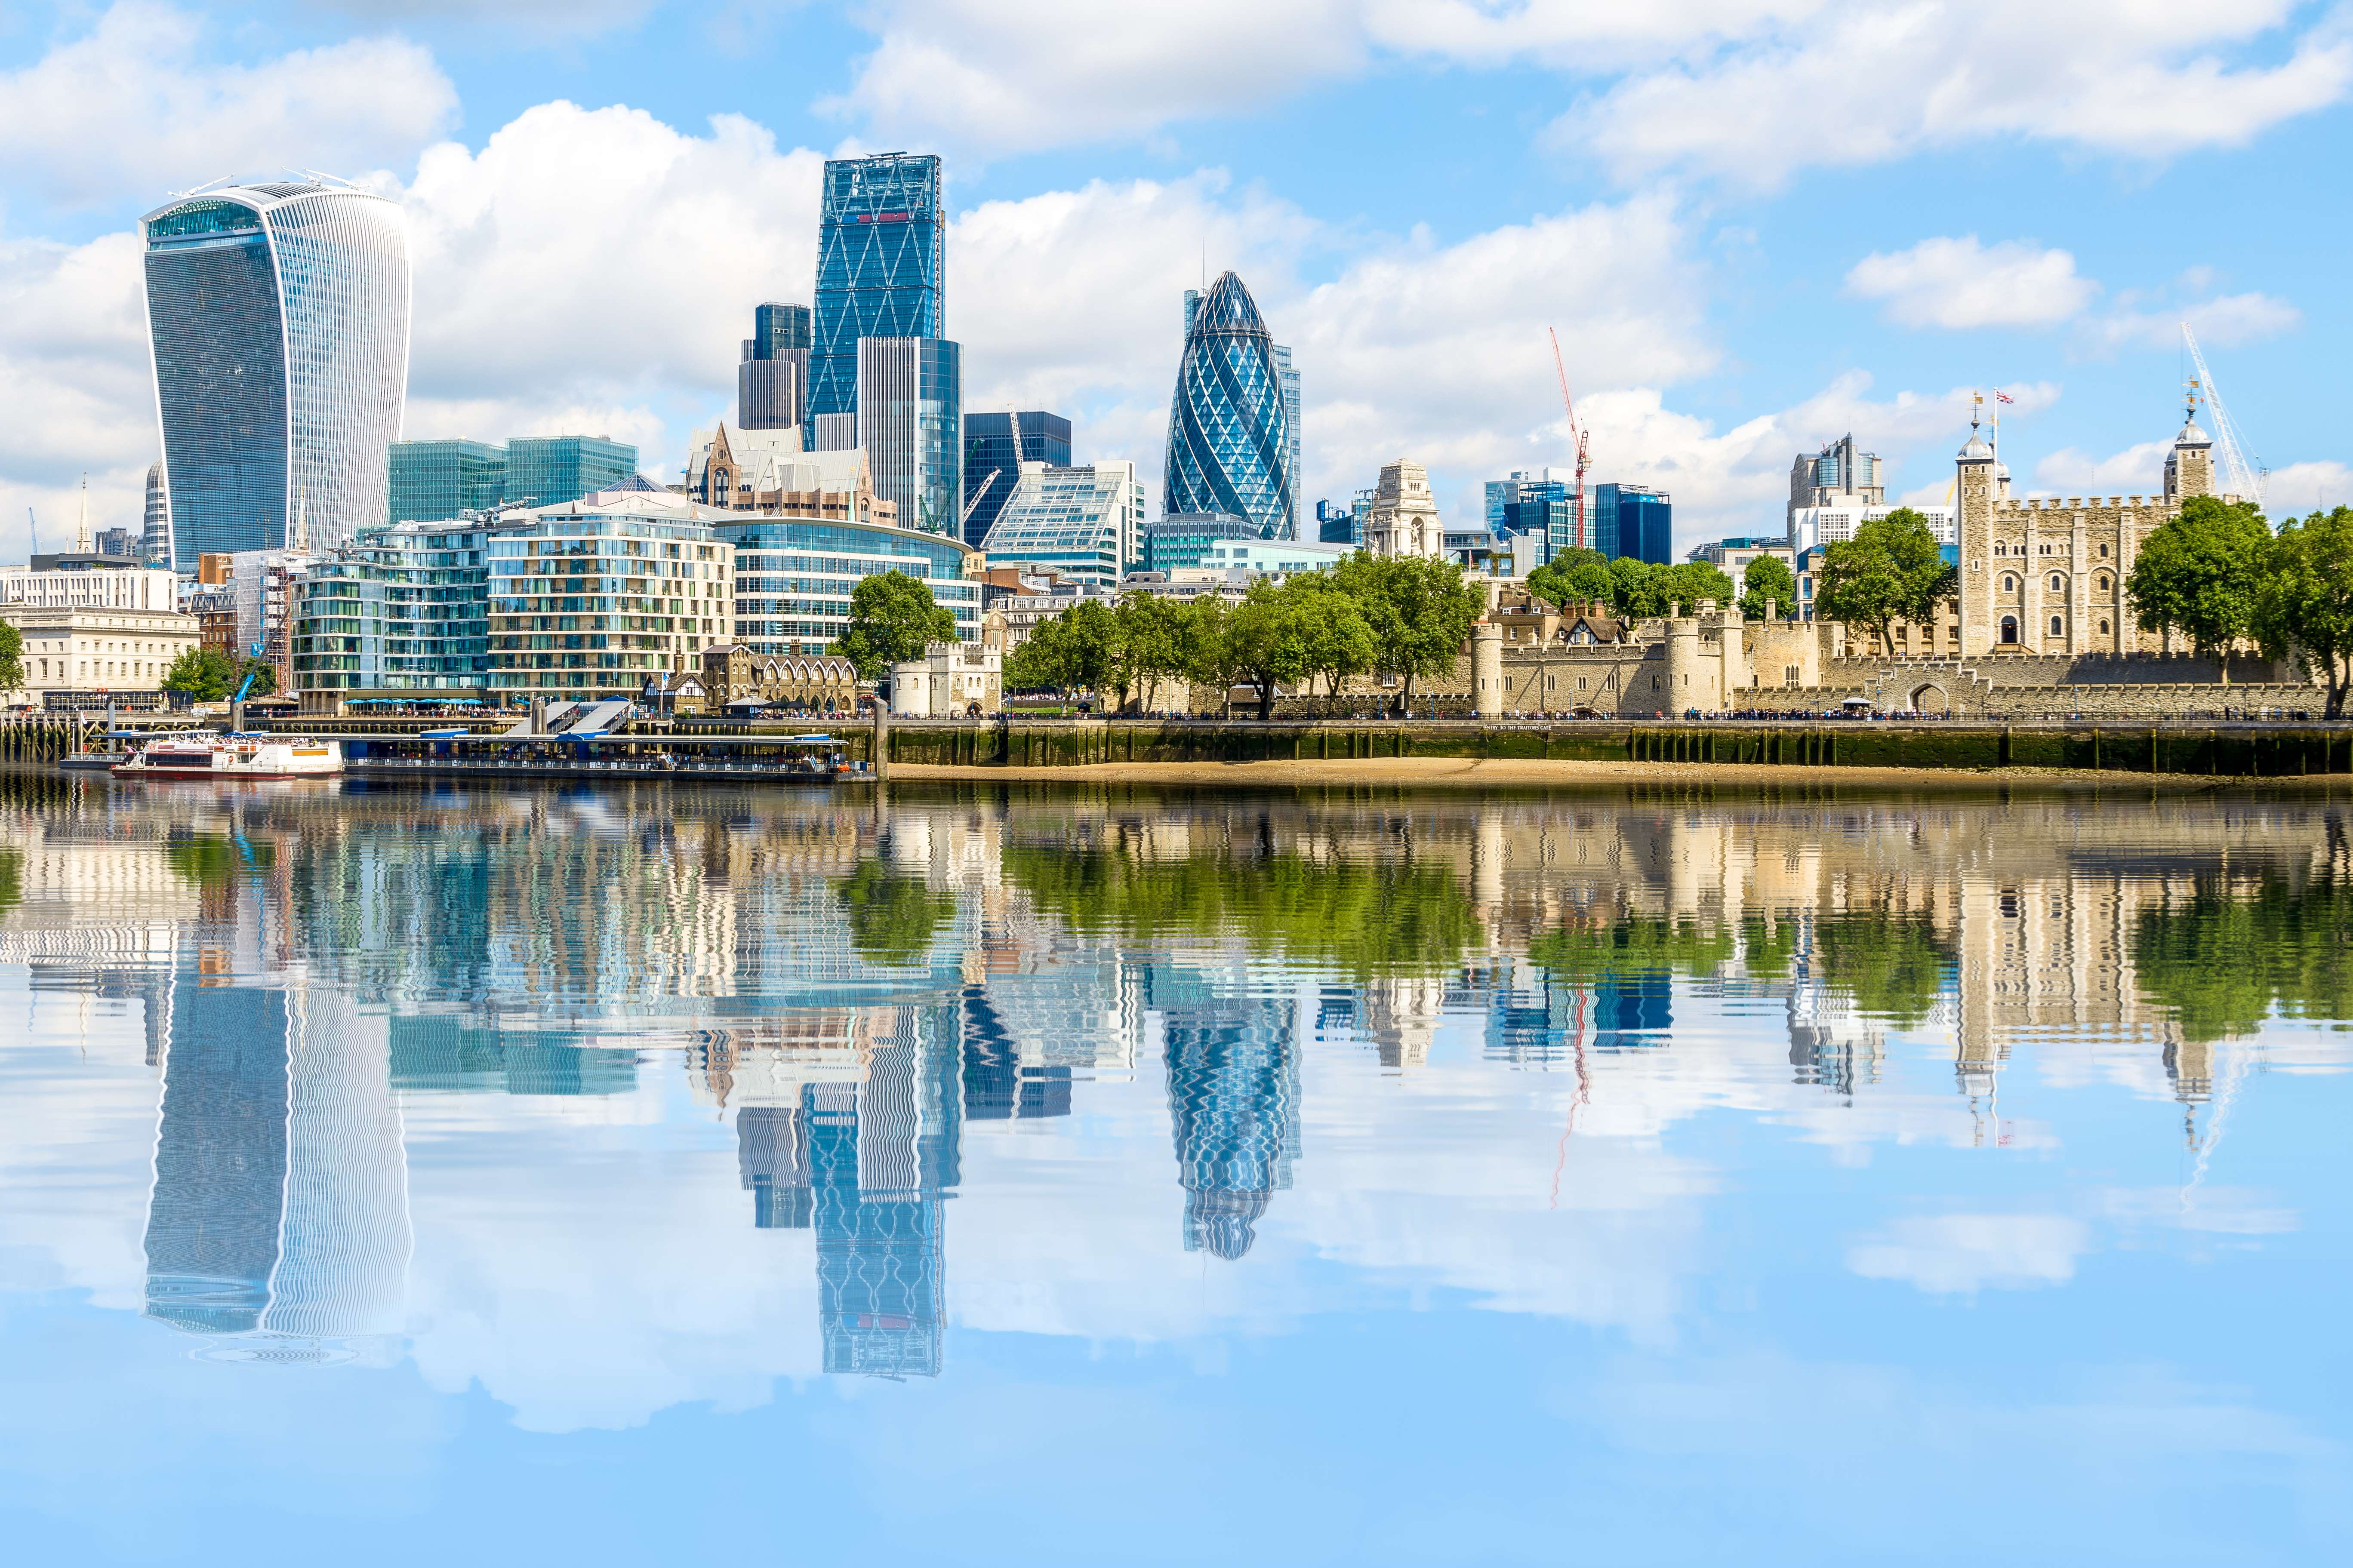 Planned infrastructure investments by the UK government will make the country even more appealing to real estate investors. Photo: Shutterstock